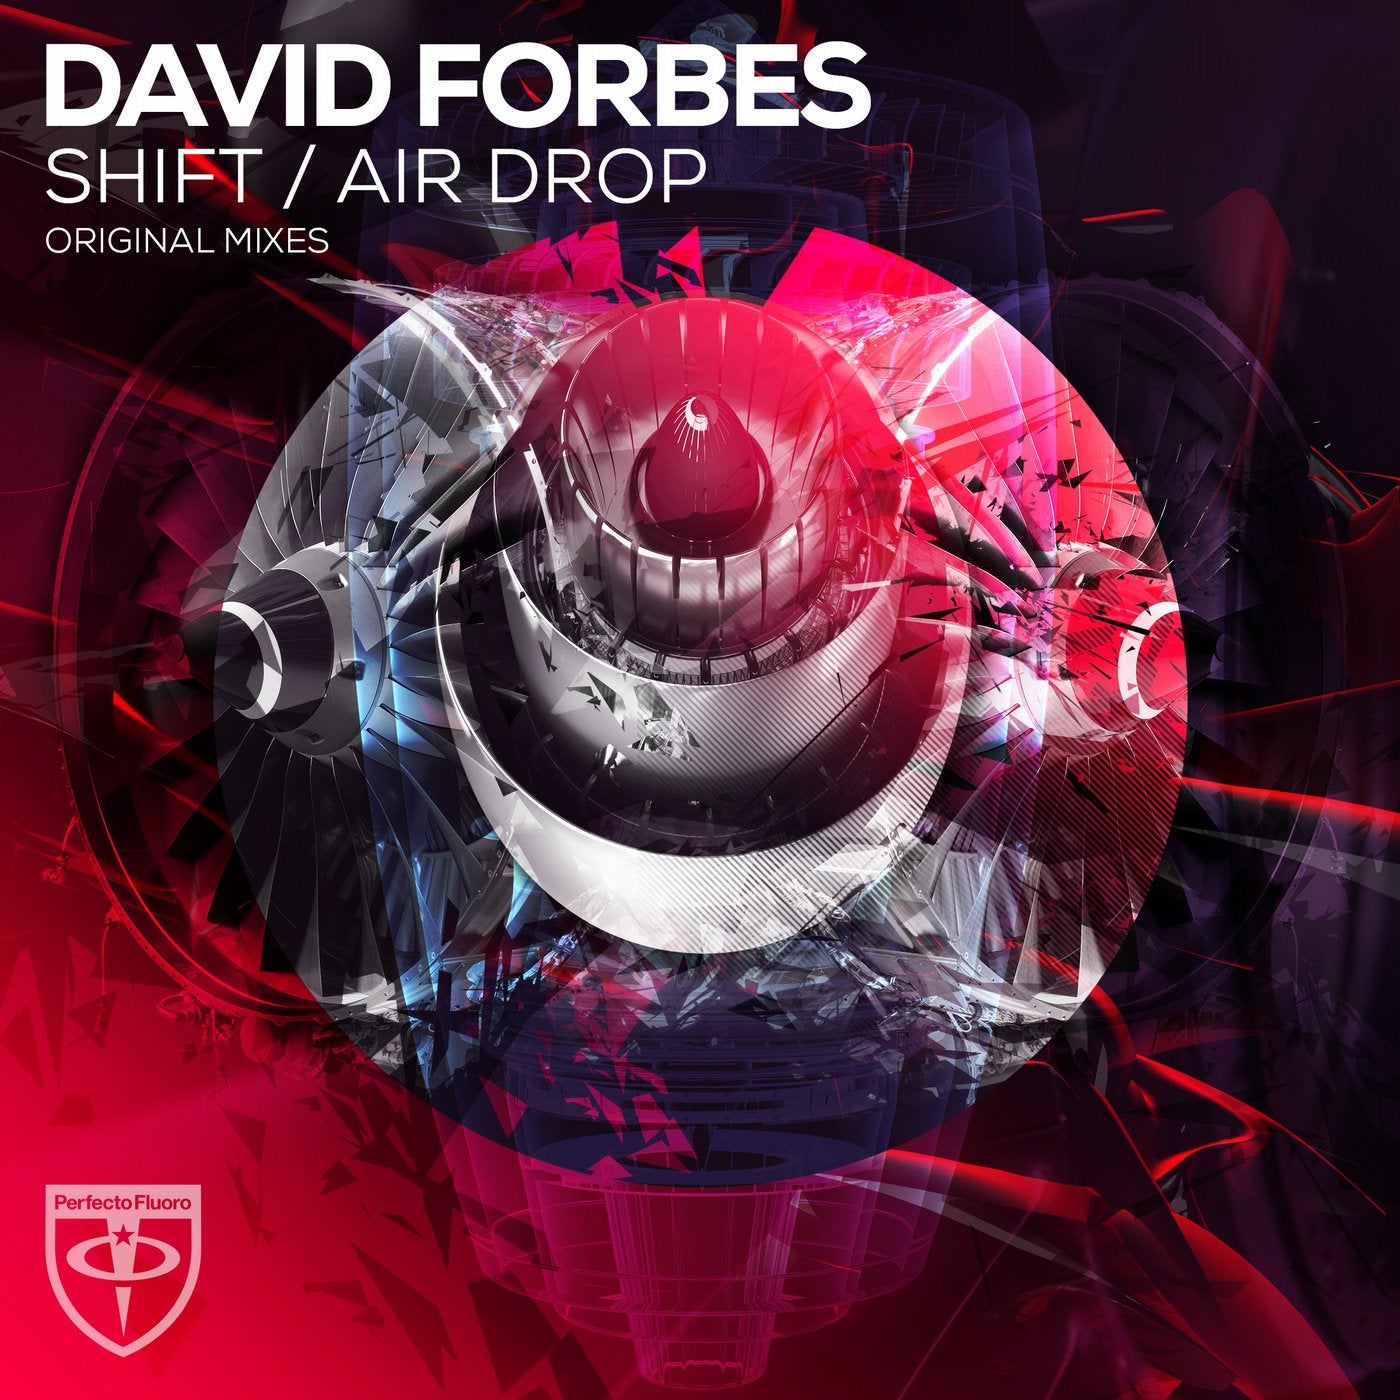 David flac. David_Forbes_-_hold_me. Full on fluoro обложки. David Forbes - questions must be asked (Kayestone's Recon Mix).